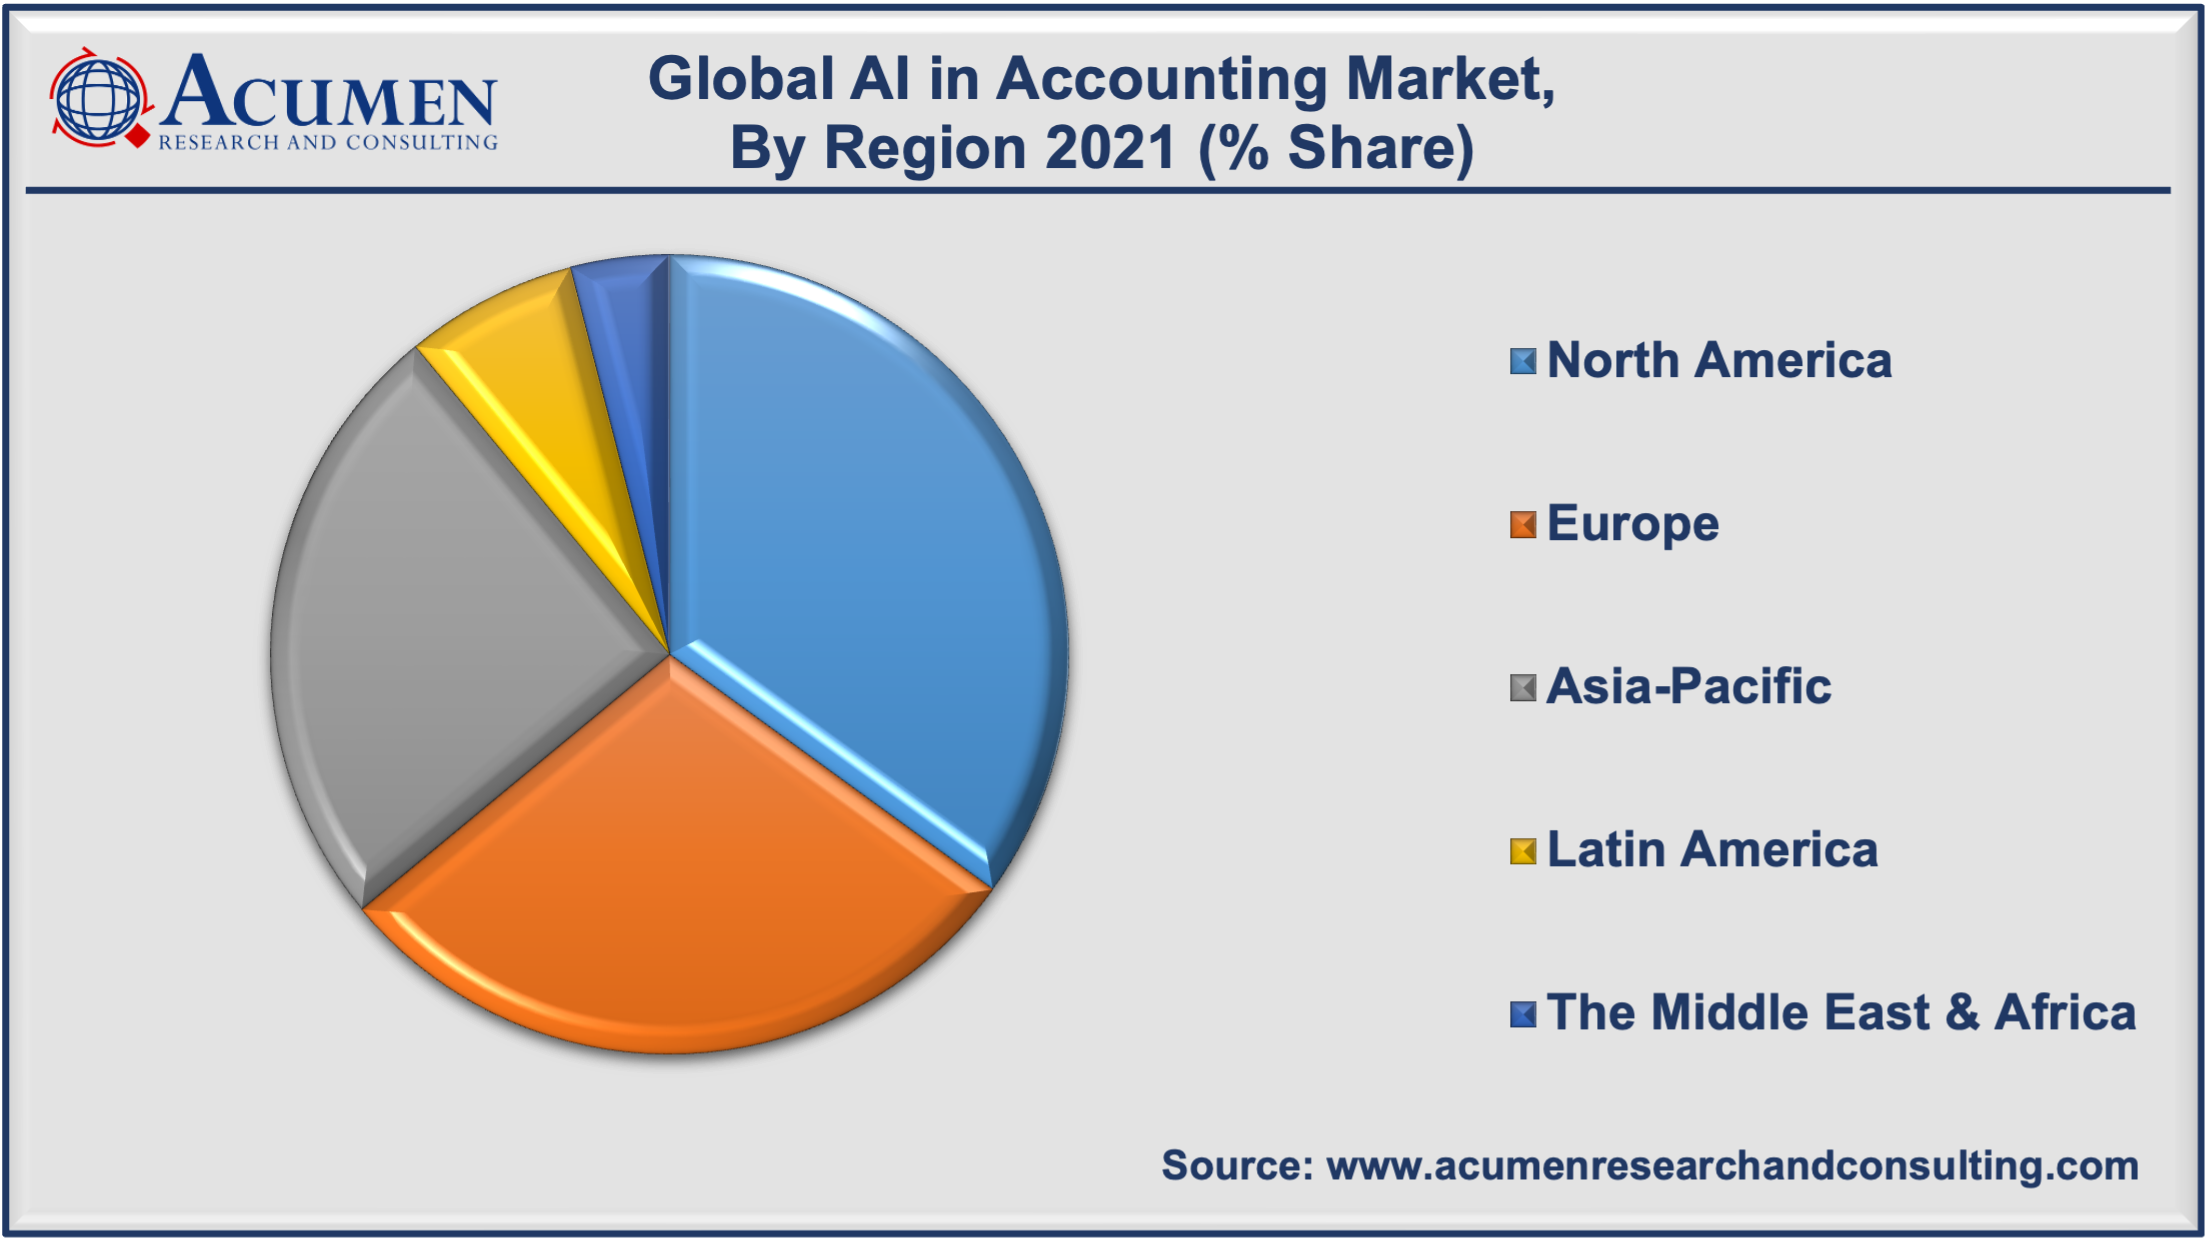 Artificial Intelligence in Accounting Market Analysis accounted for USD 1,511 Million in 2021 and is estimated to reach USD 53,893 Million by 2030.